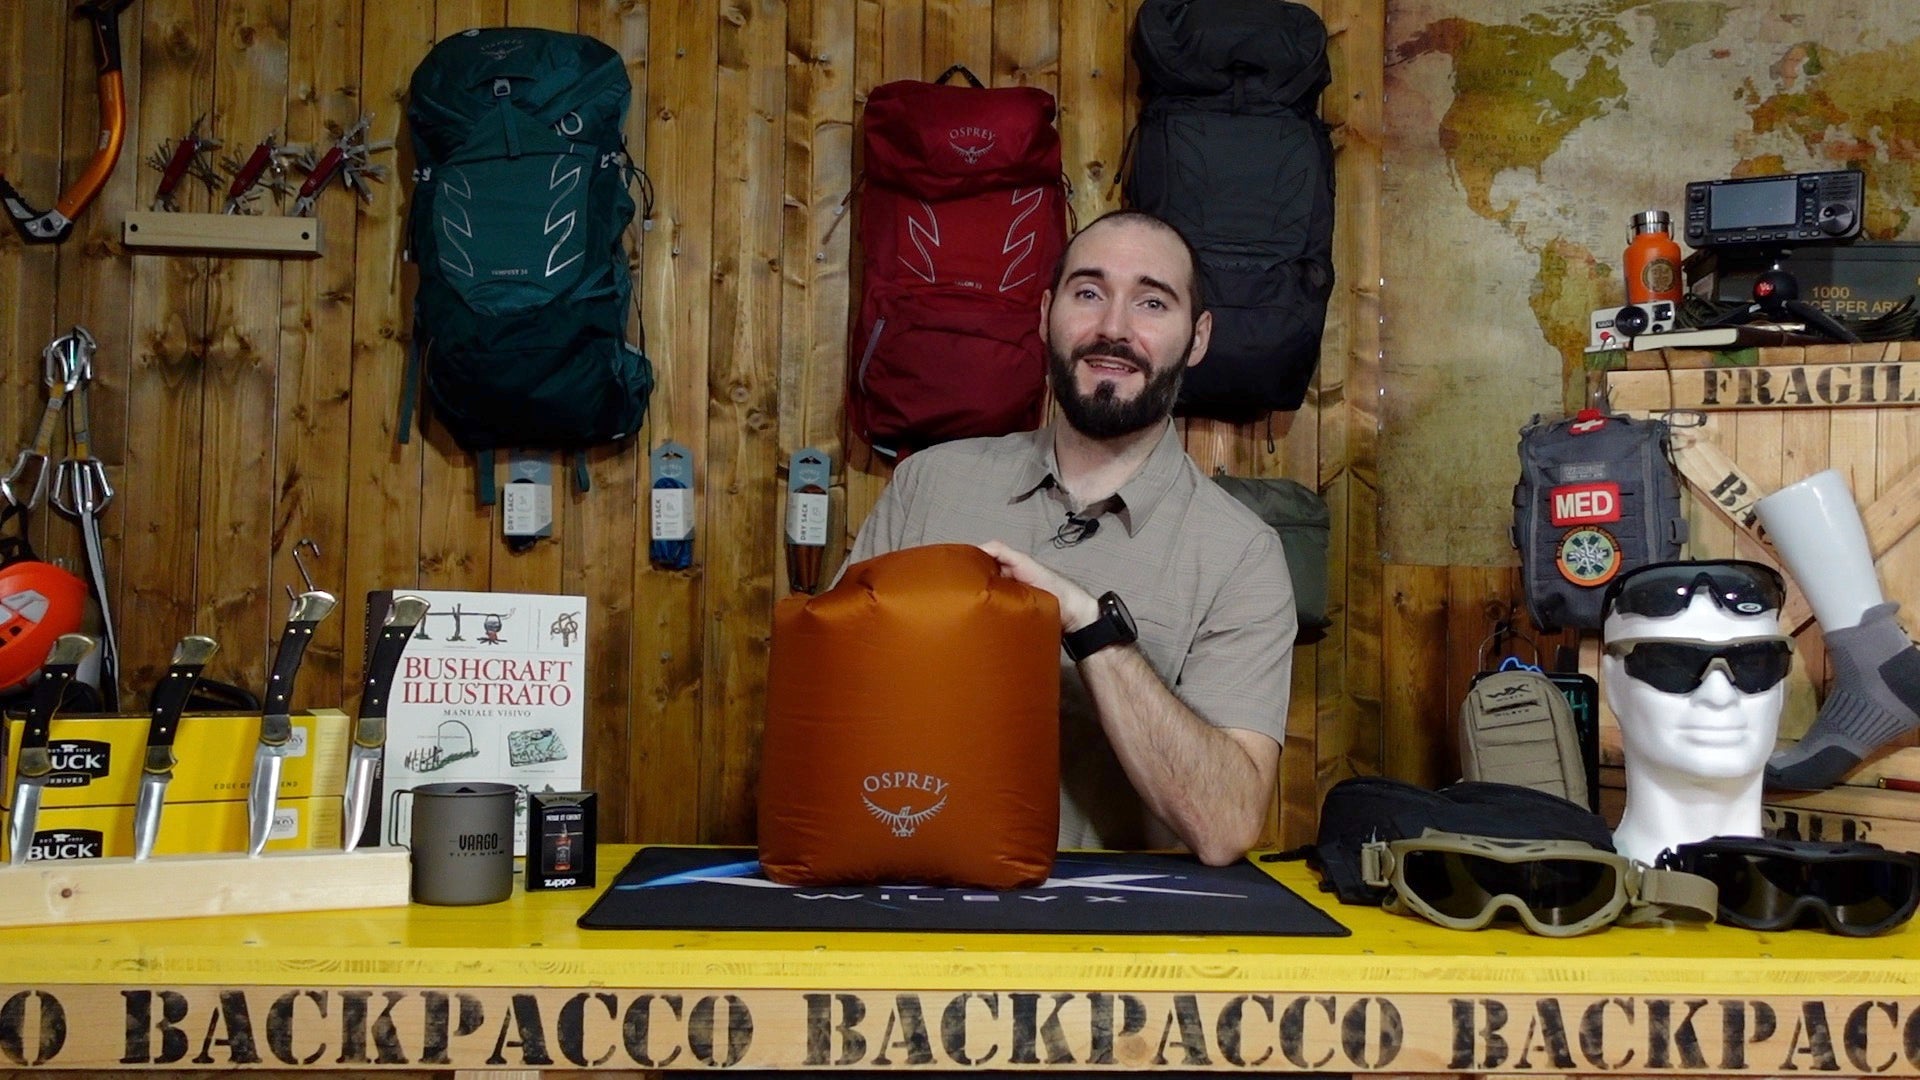 Paolo di Backpacco spiega le Osprey Dry Sack